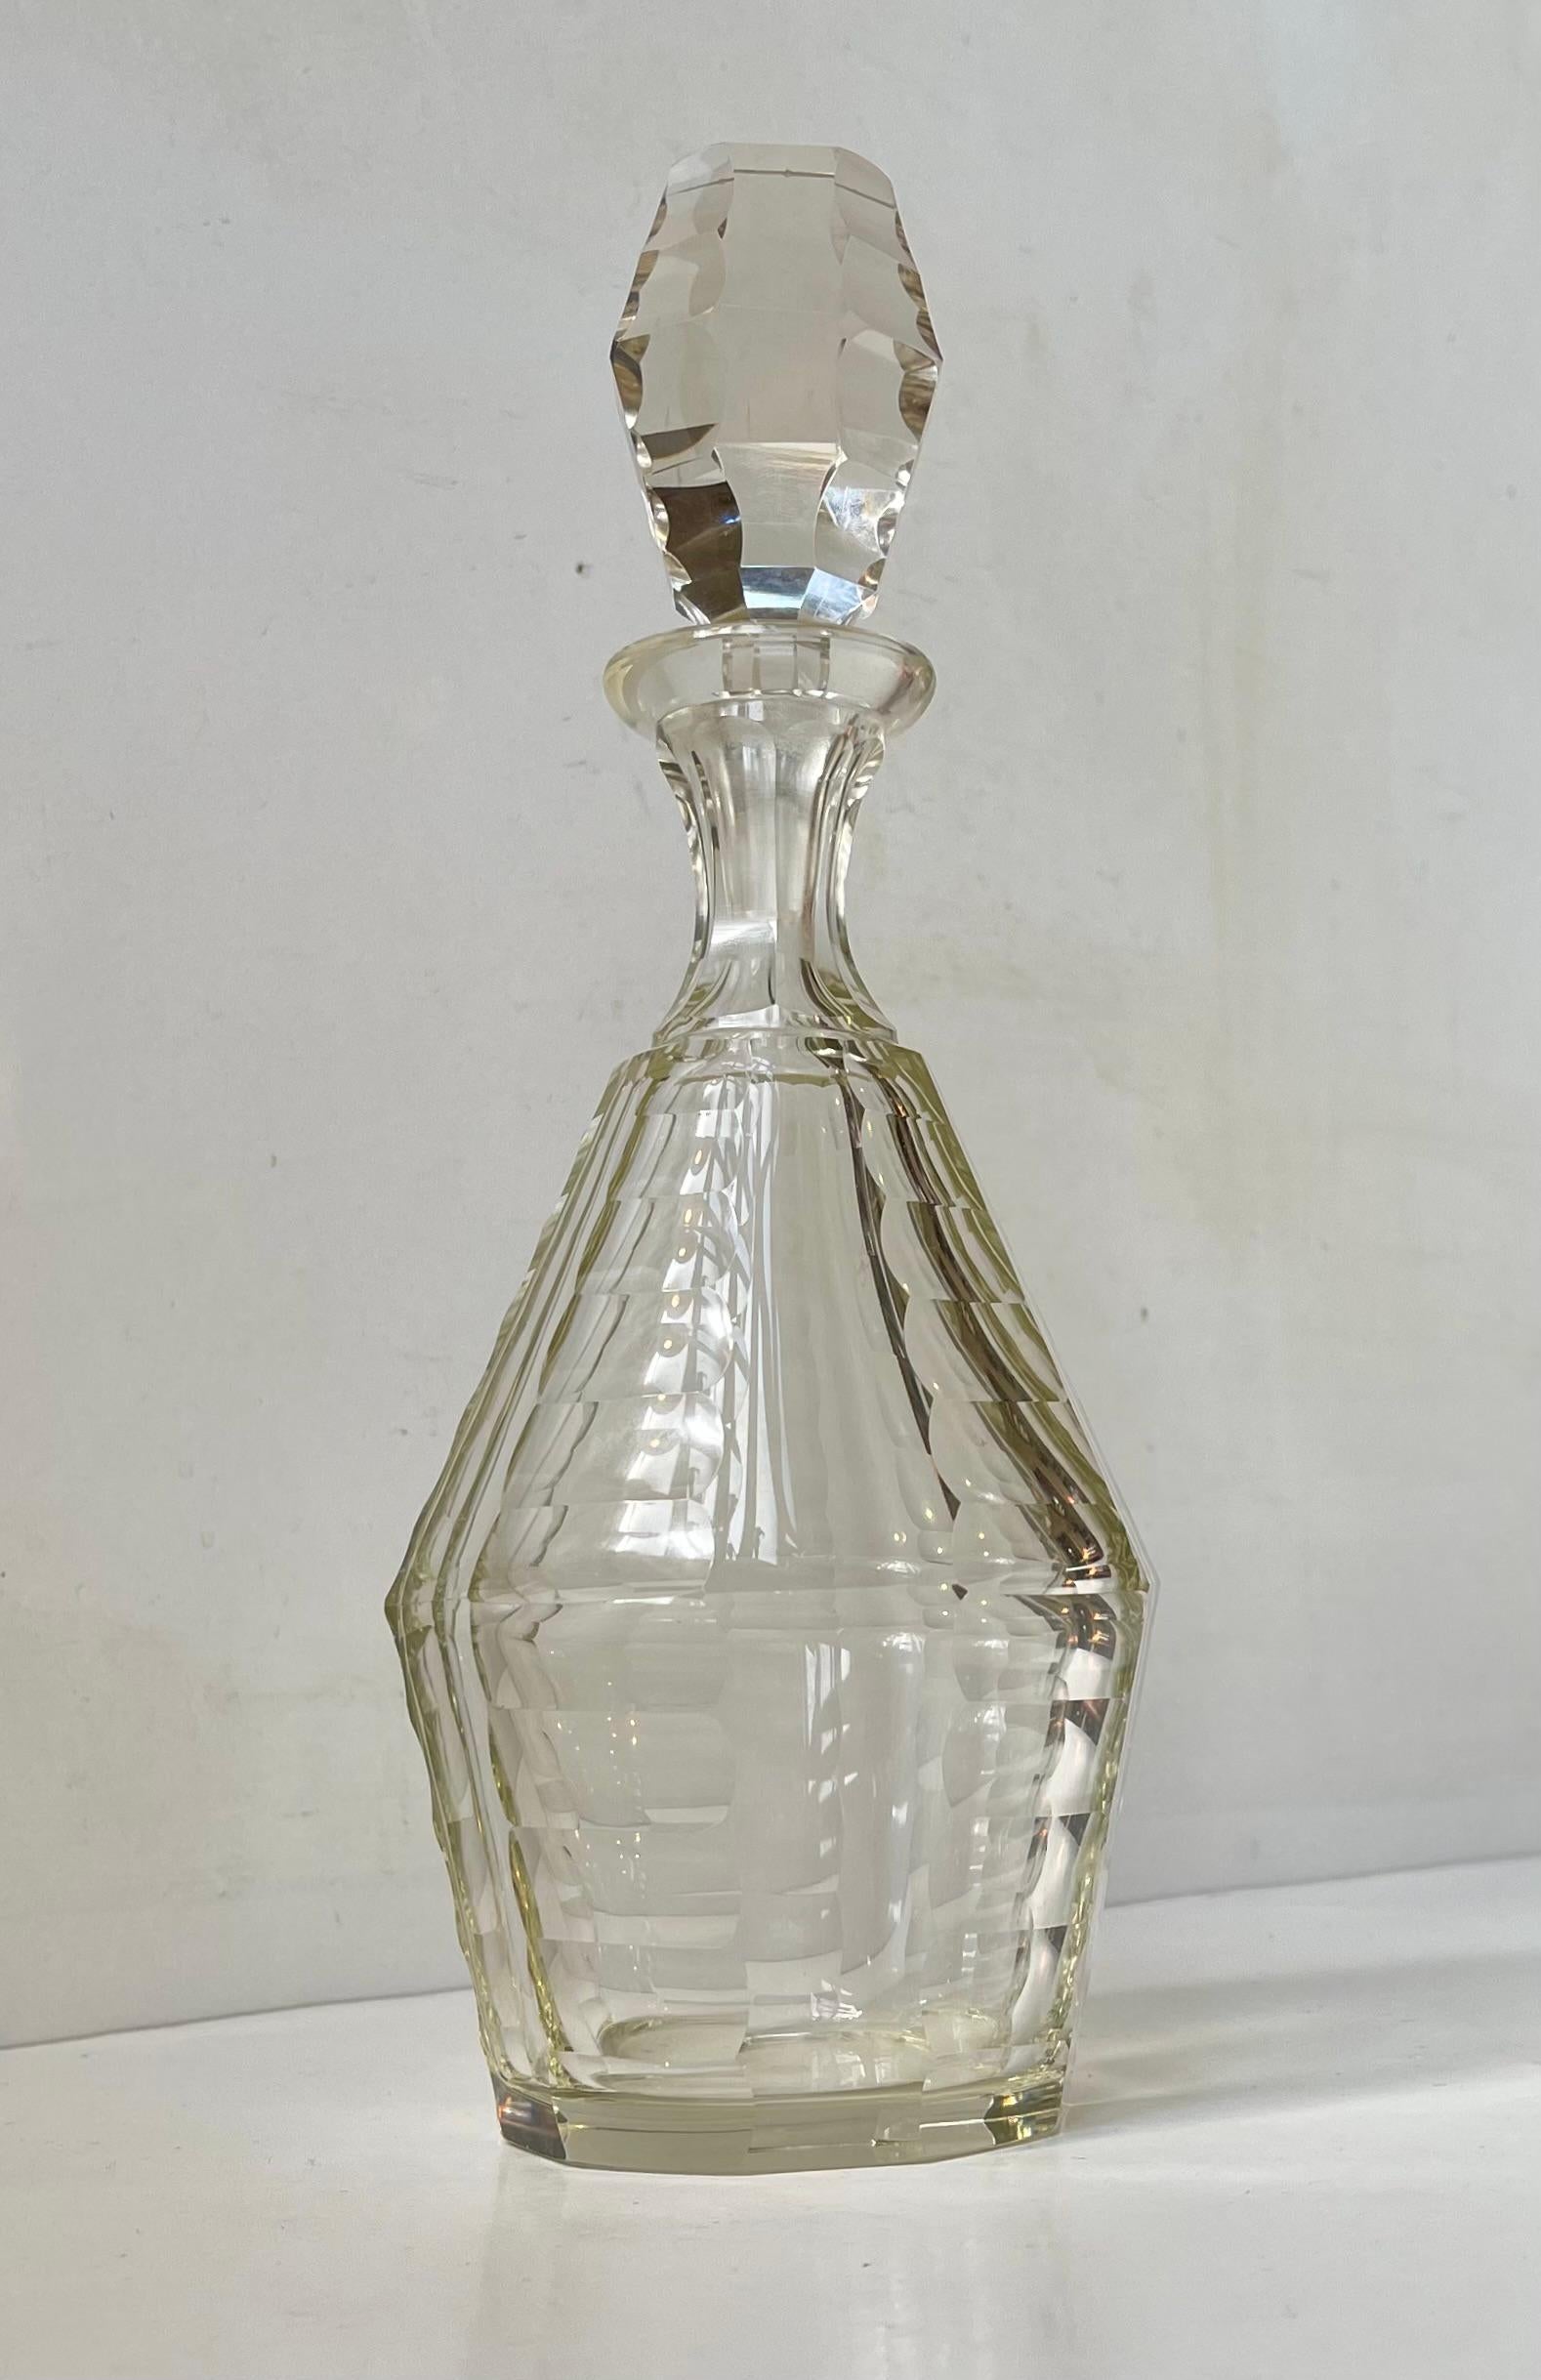 Baccarat France Art Deco Decanter in Faceted Crystal, 1930s In Good Condition For Sale In Esbjerg, DK